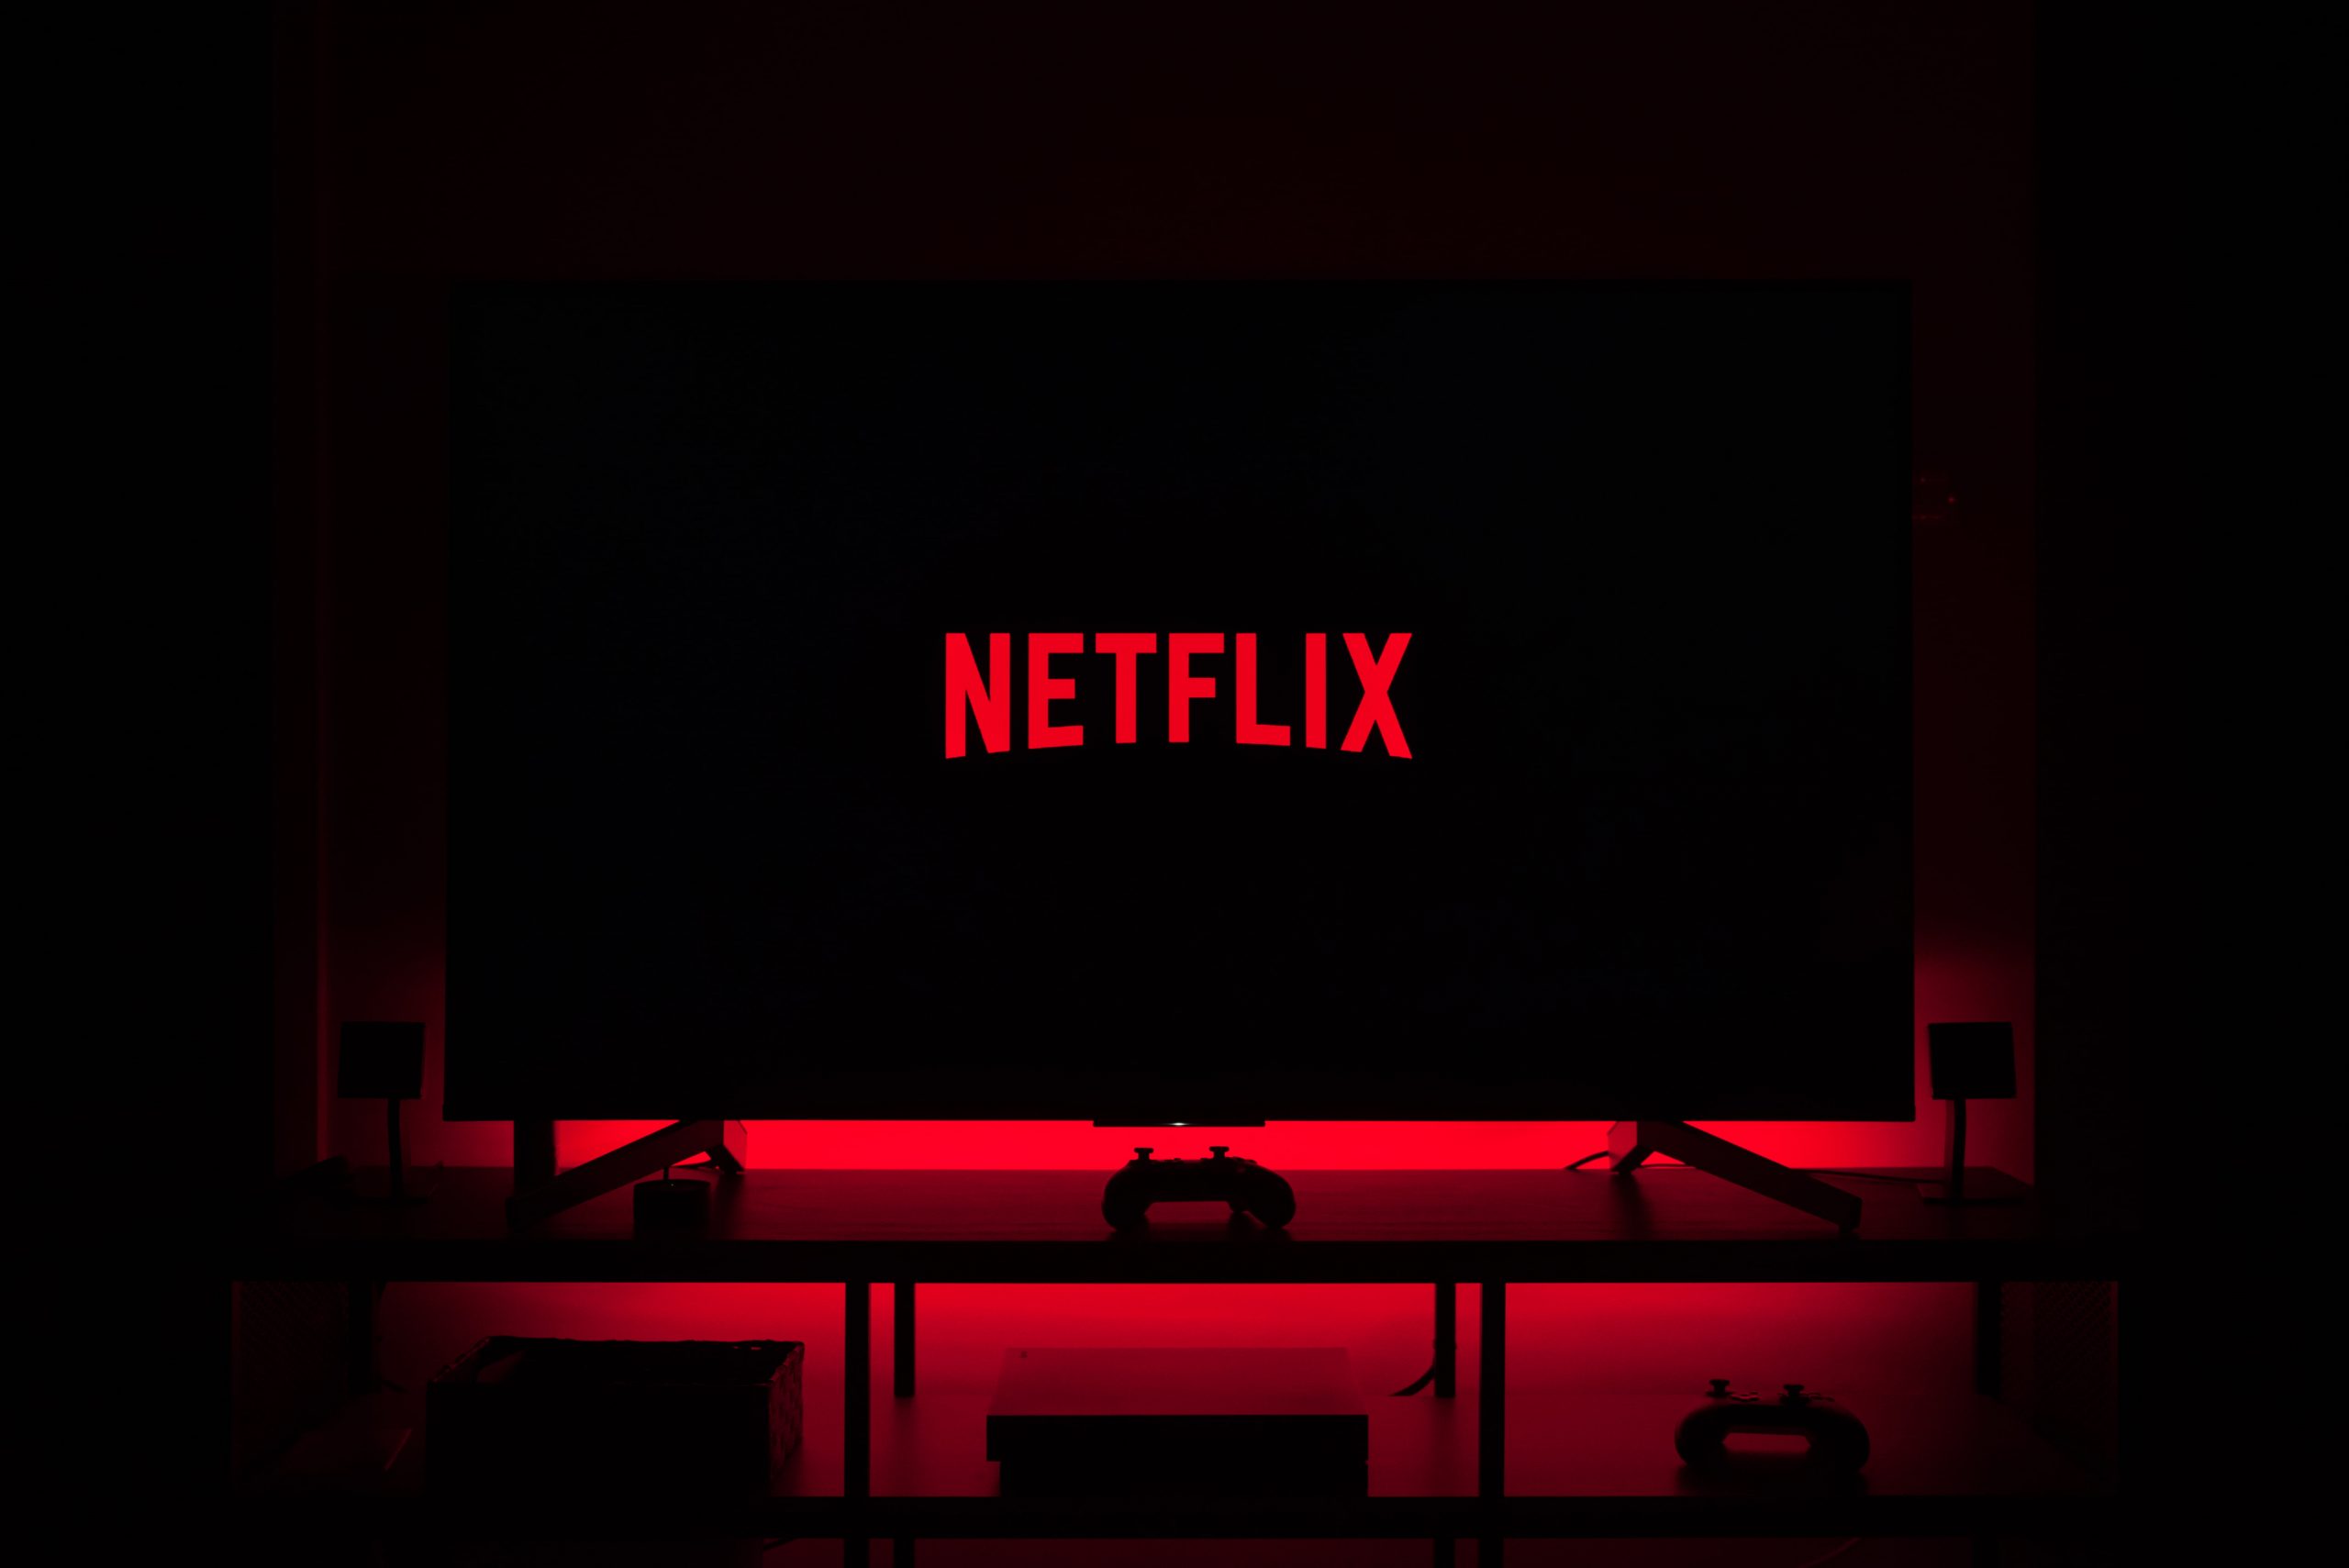 What time does Netflix release new shows